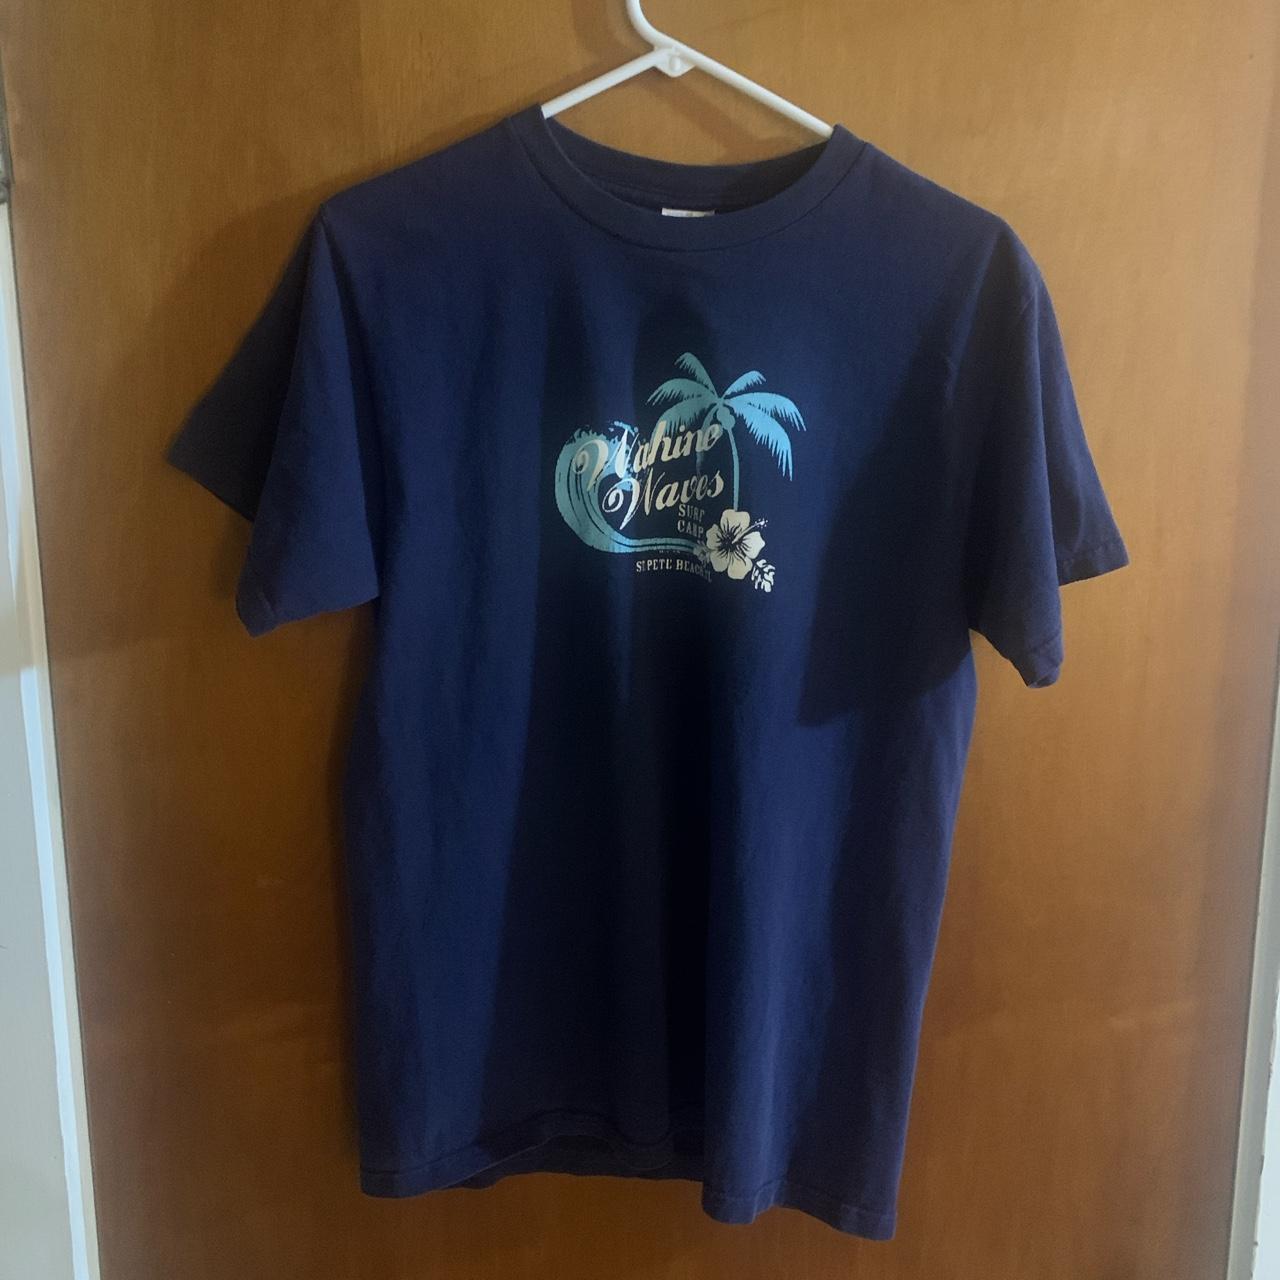 Vintage surf t shirt Size M Good condition, small... - Depop